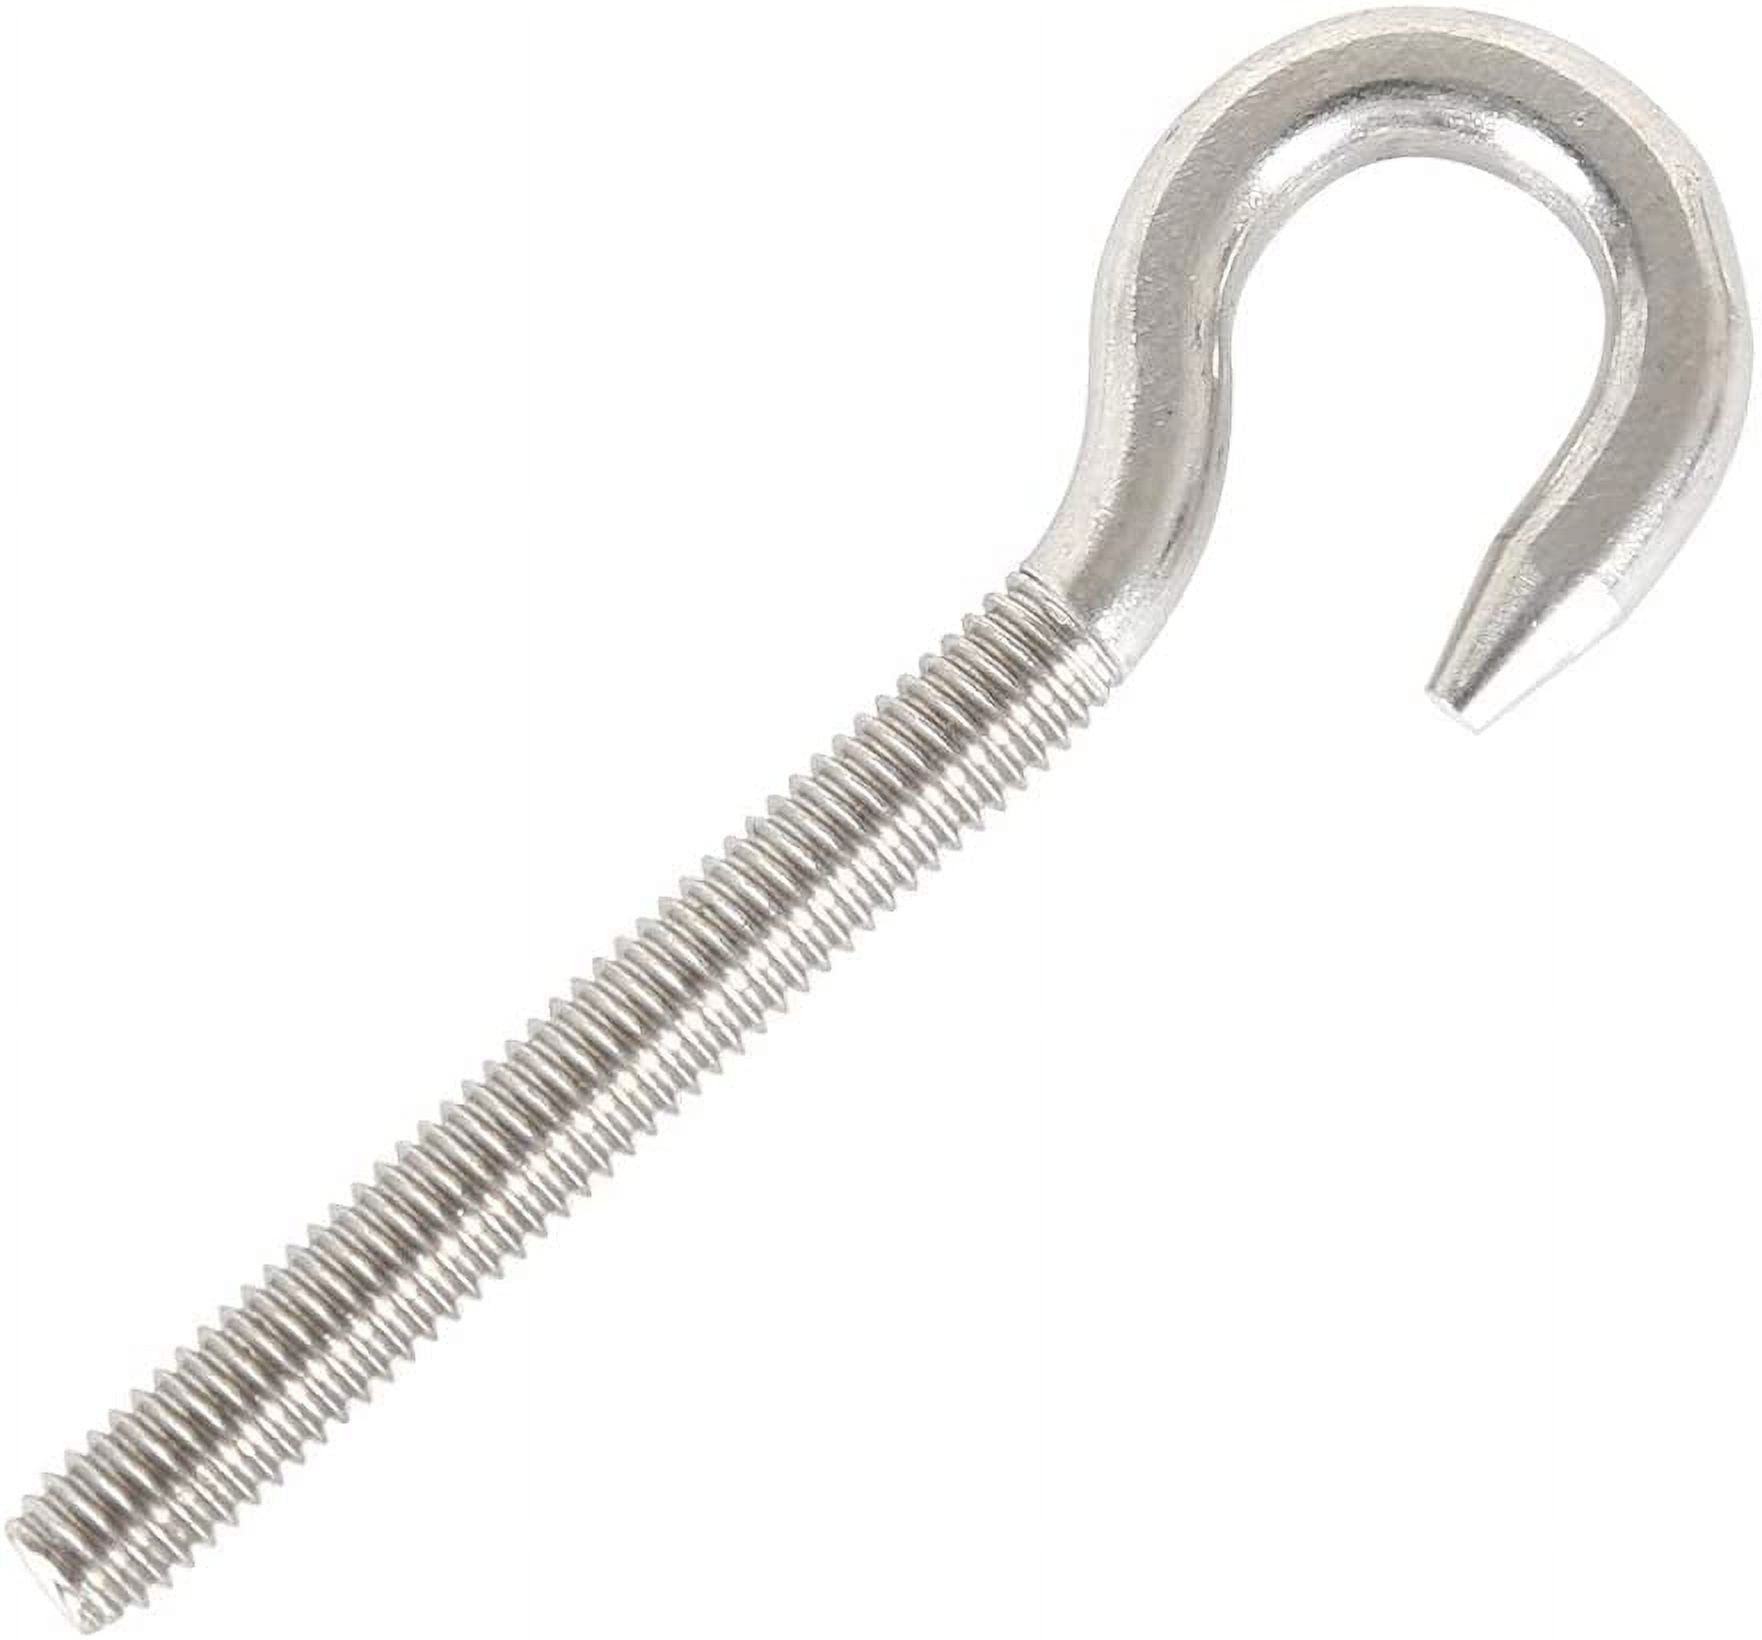 M8 Hook Screw Ring Hook 304 Stainless Steel High Hardness Steel Hook  Hanging Item Screw Hook For Hanging Chandeliers Crafts 5Pcs 